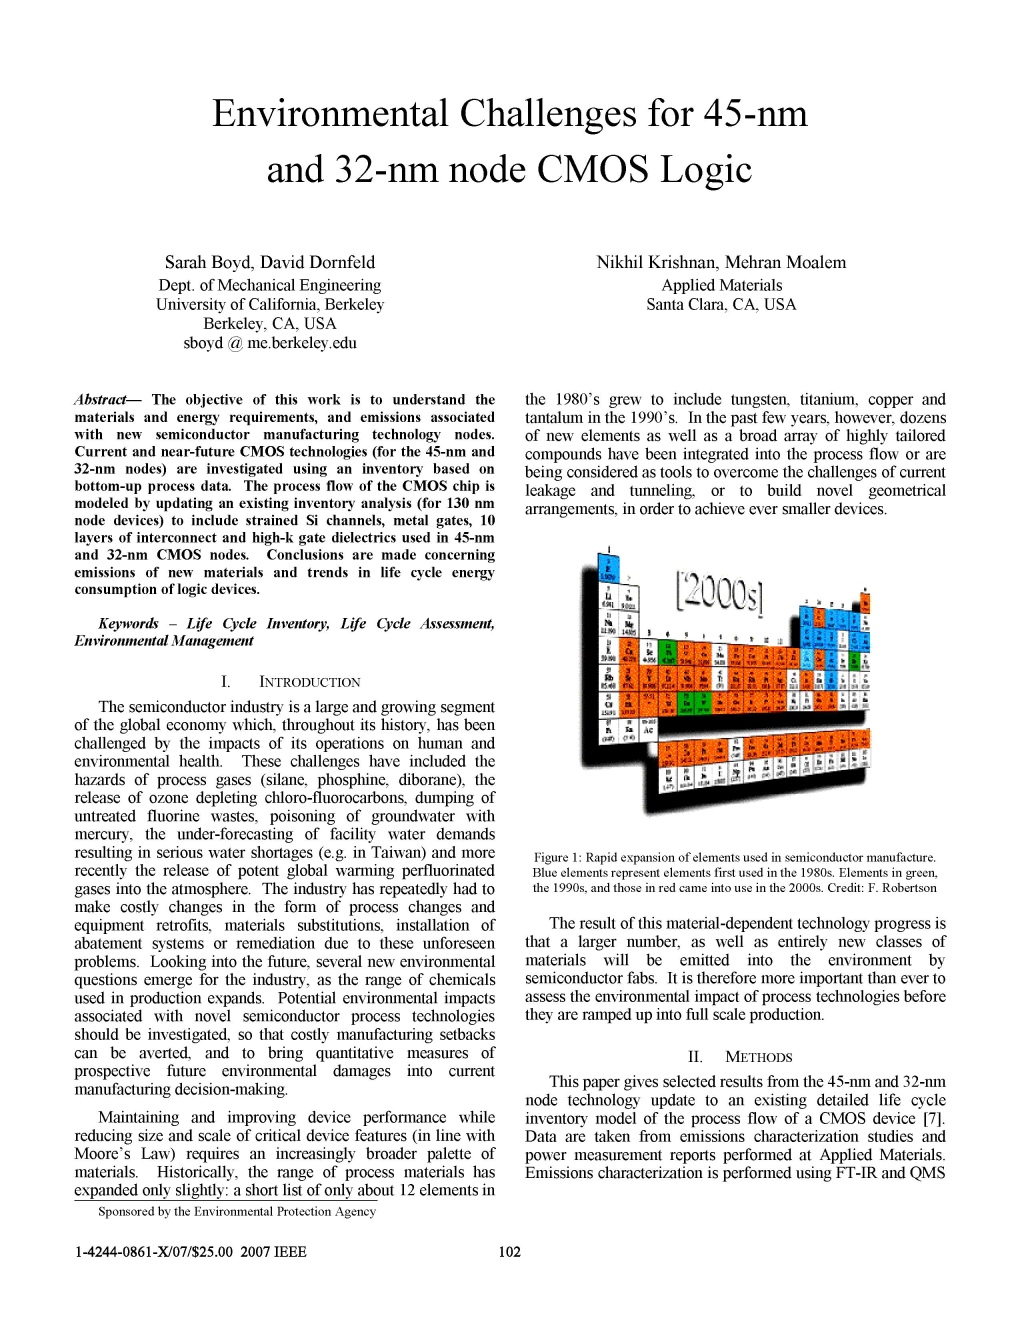 Environmental Challenges for 45-Nm and 32-Nm Node CMOS Logic